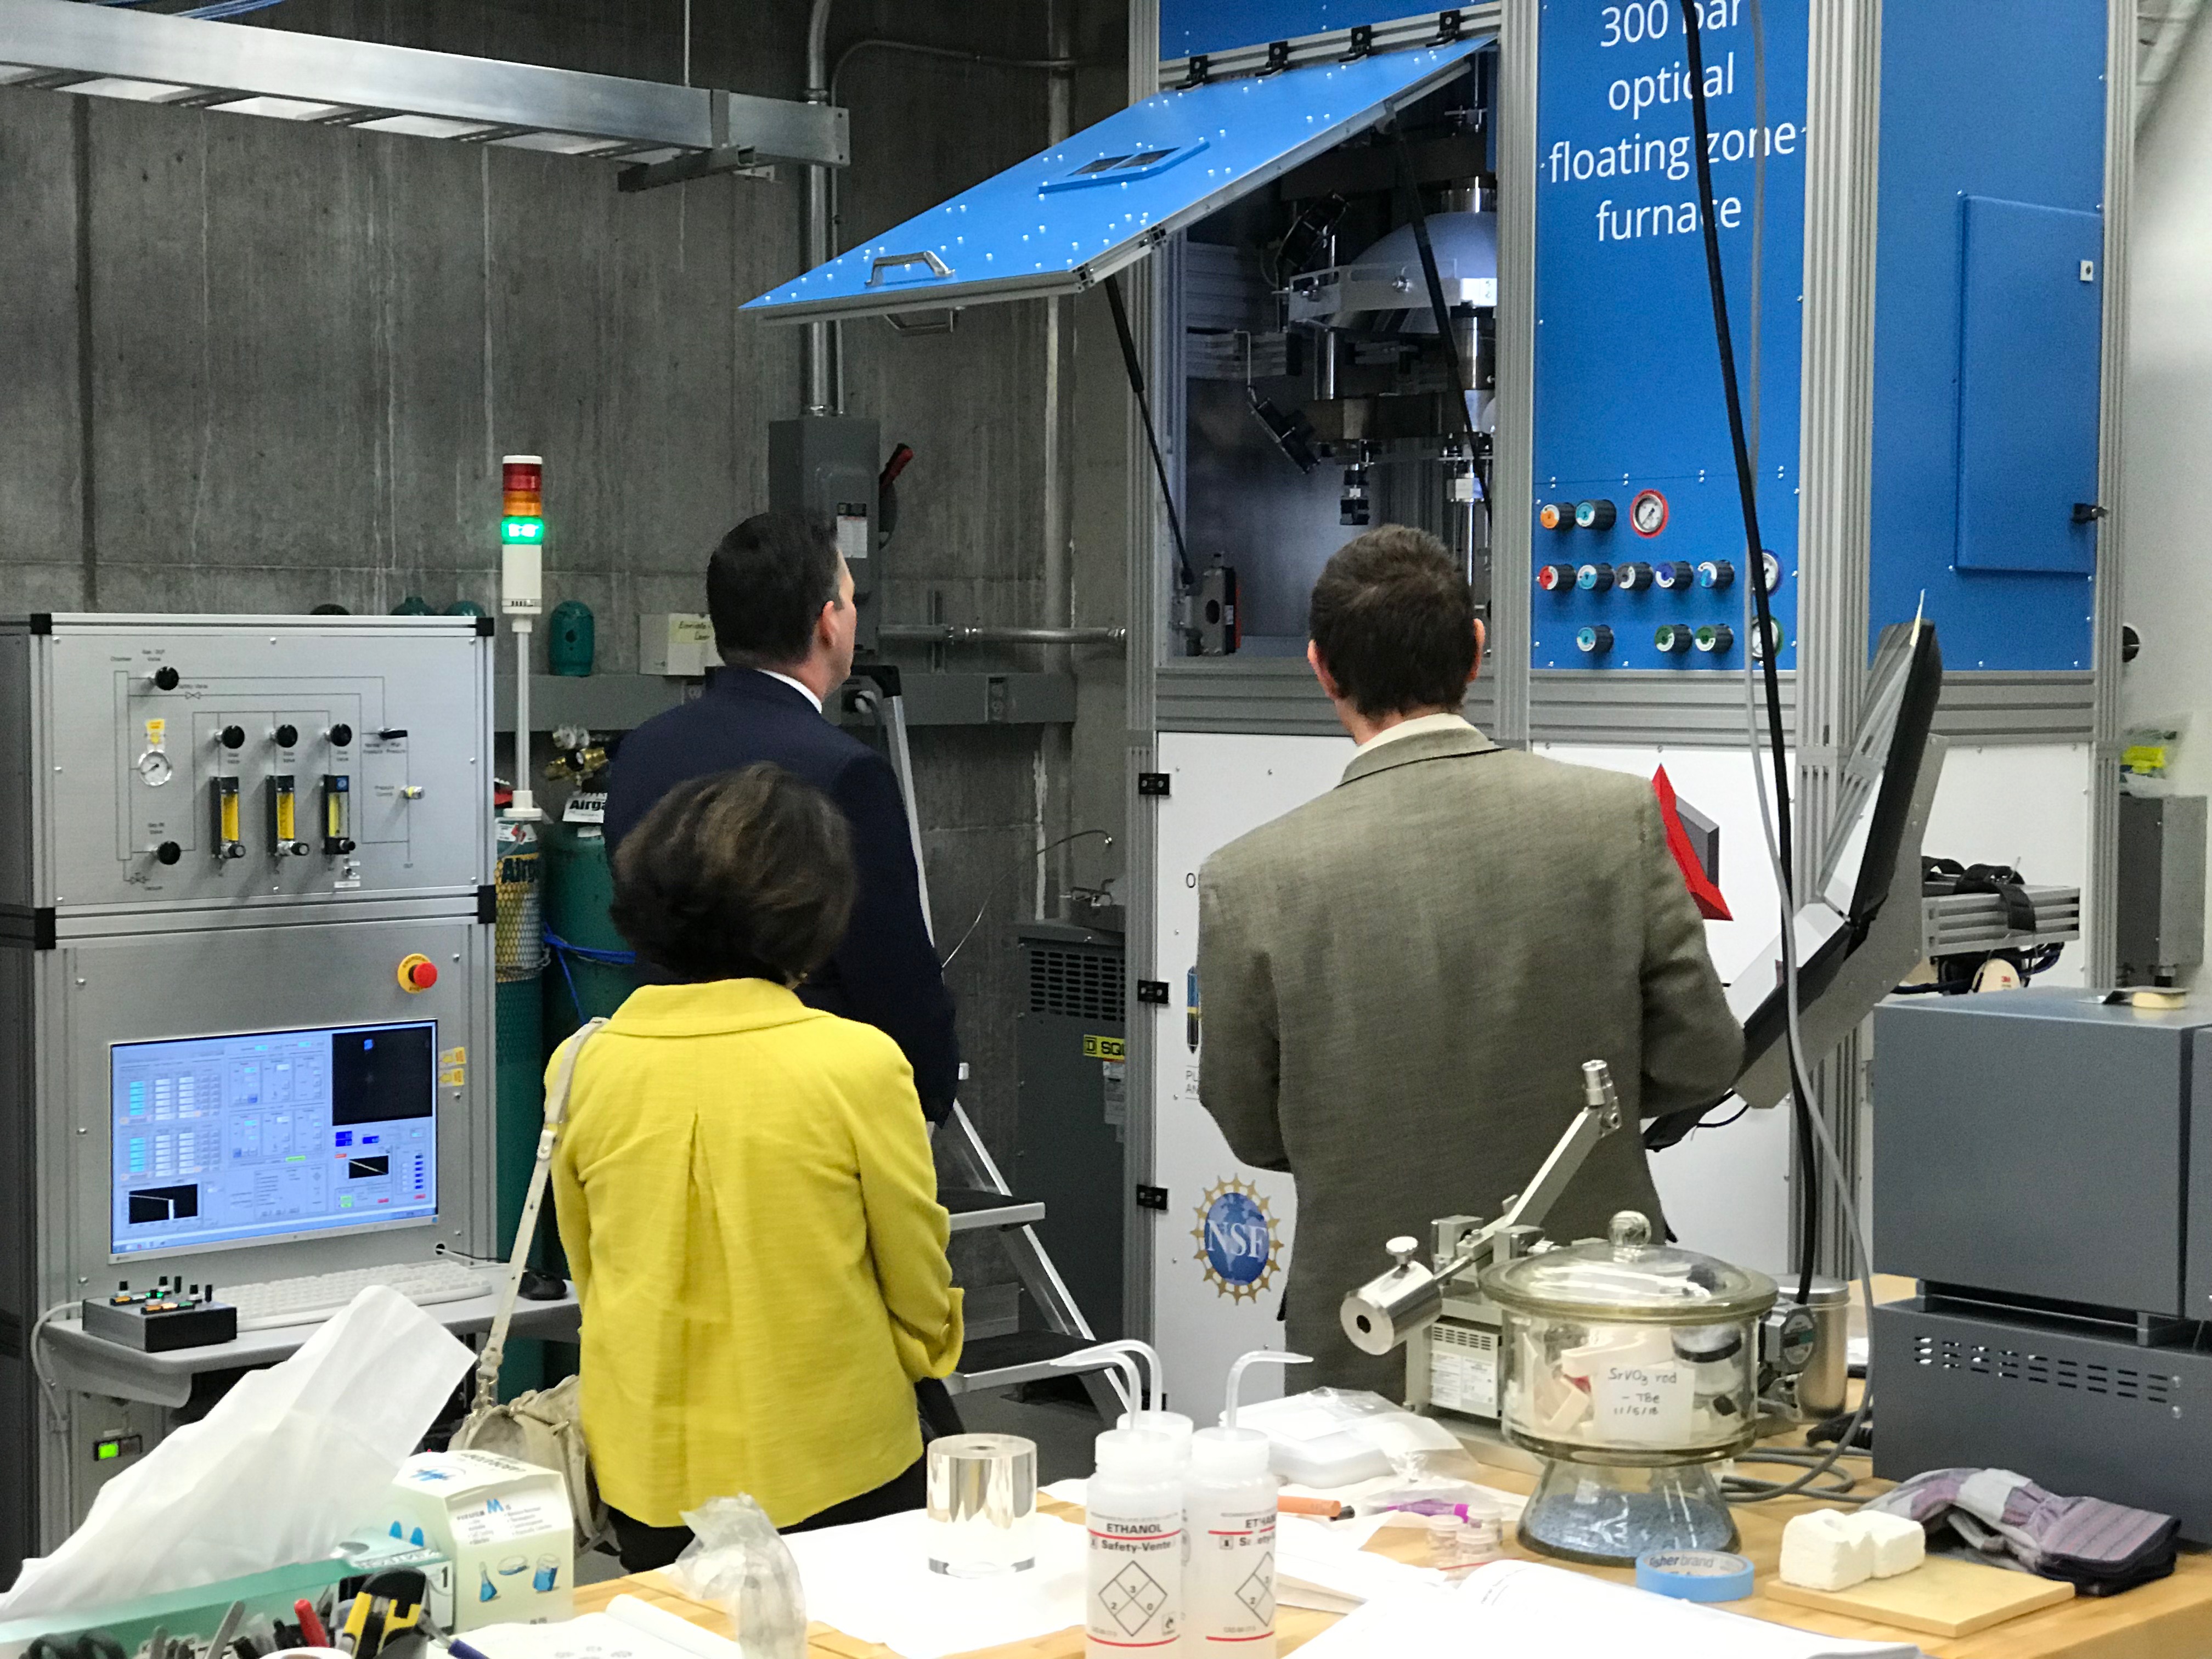 Officials viewing lab equipment